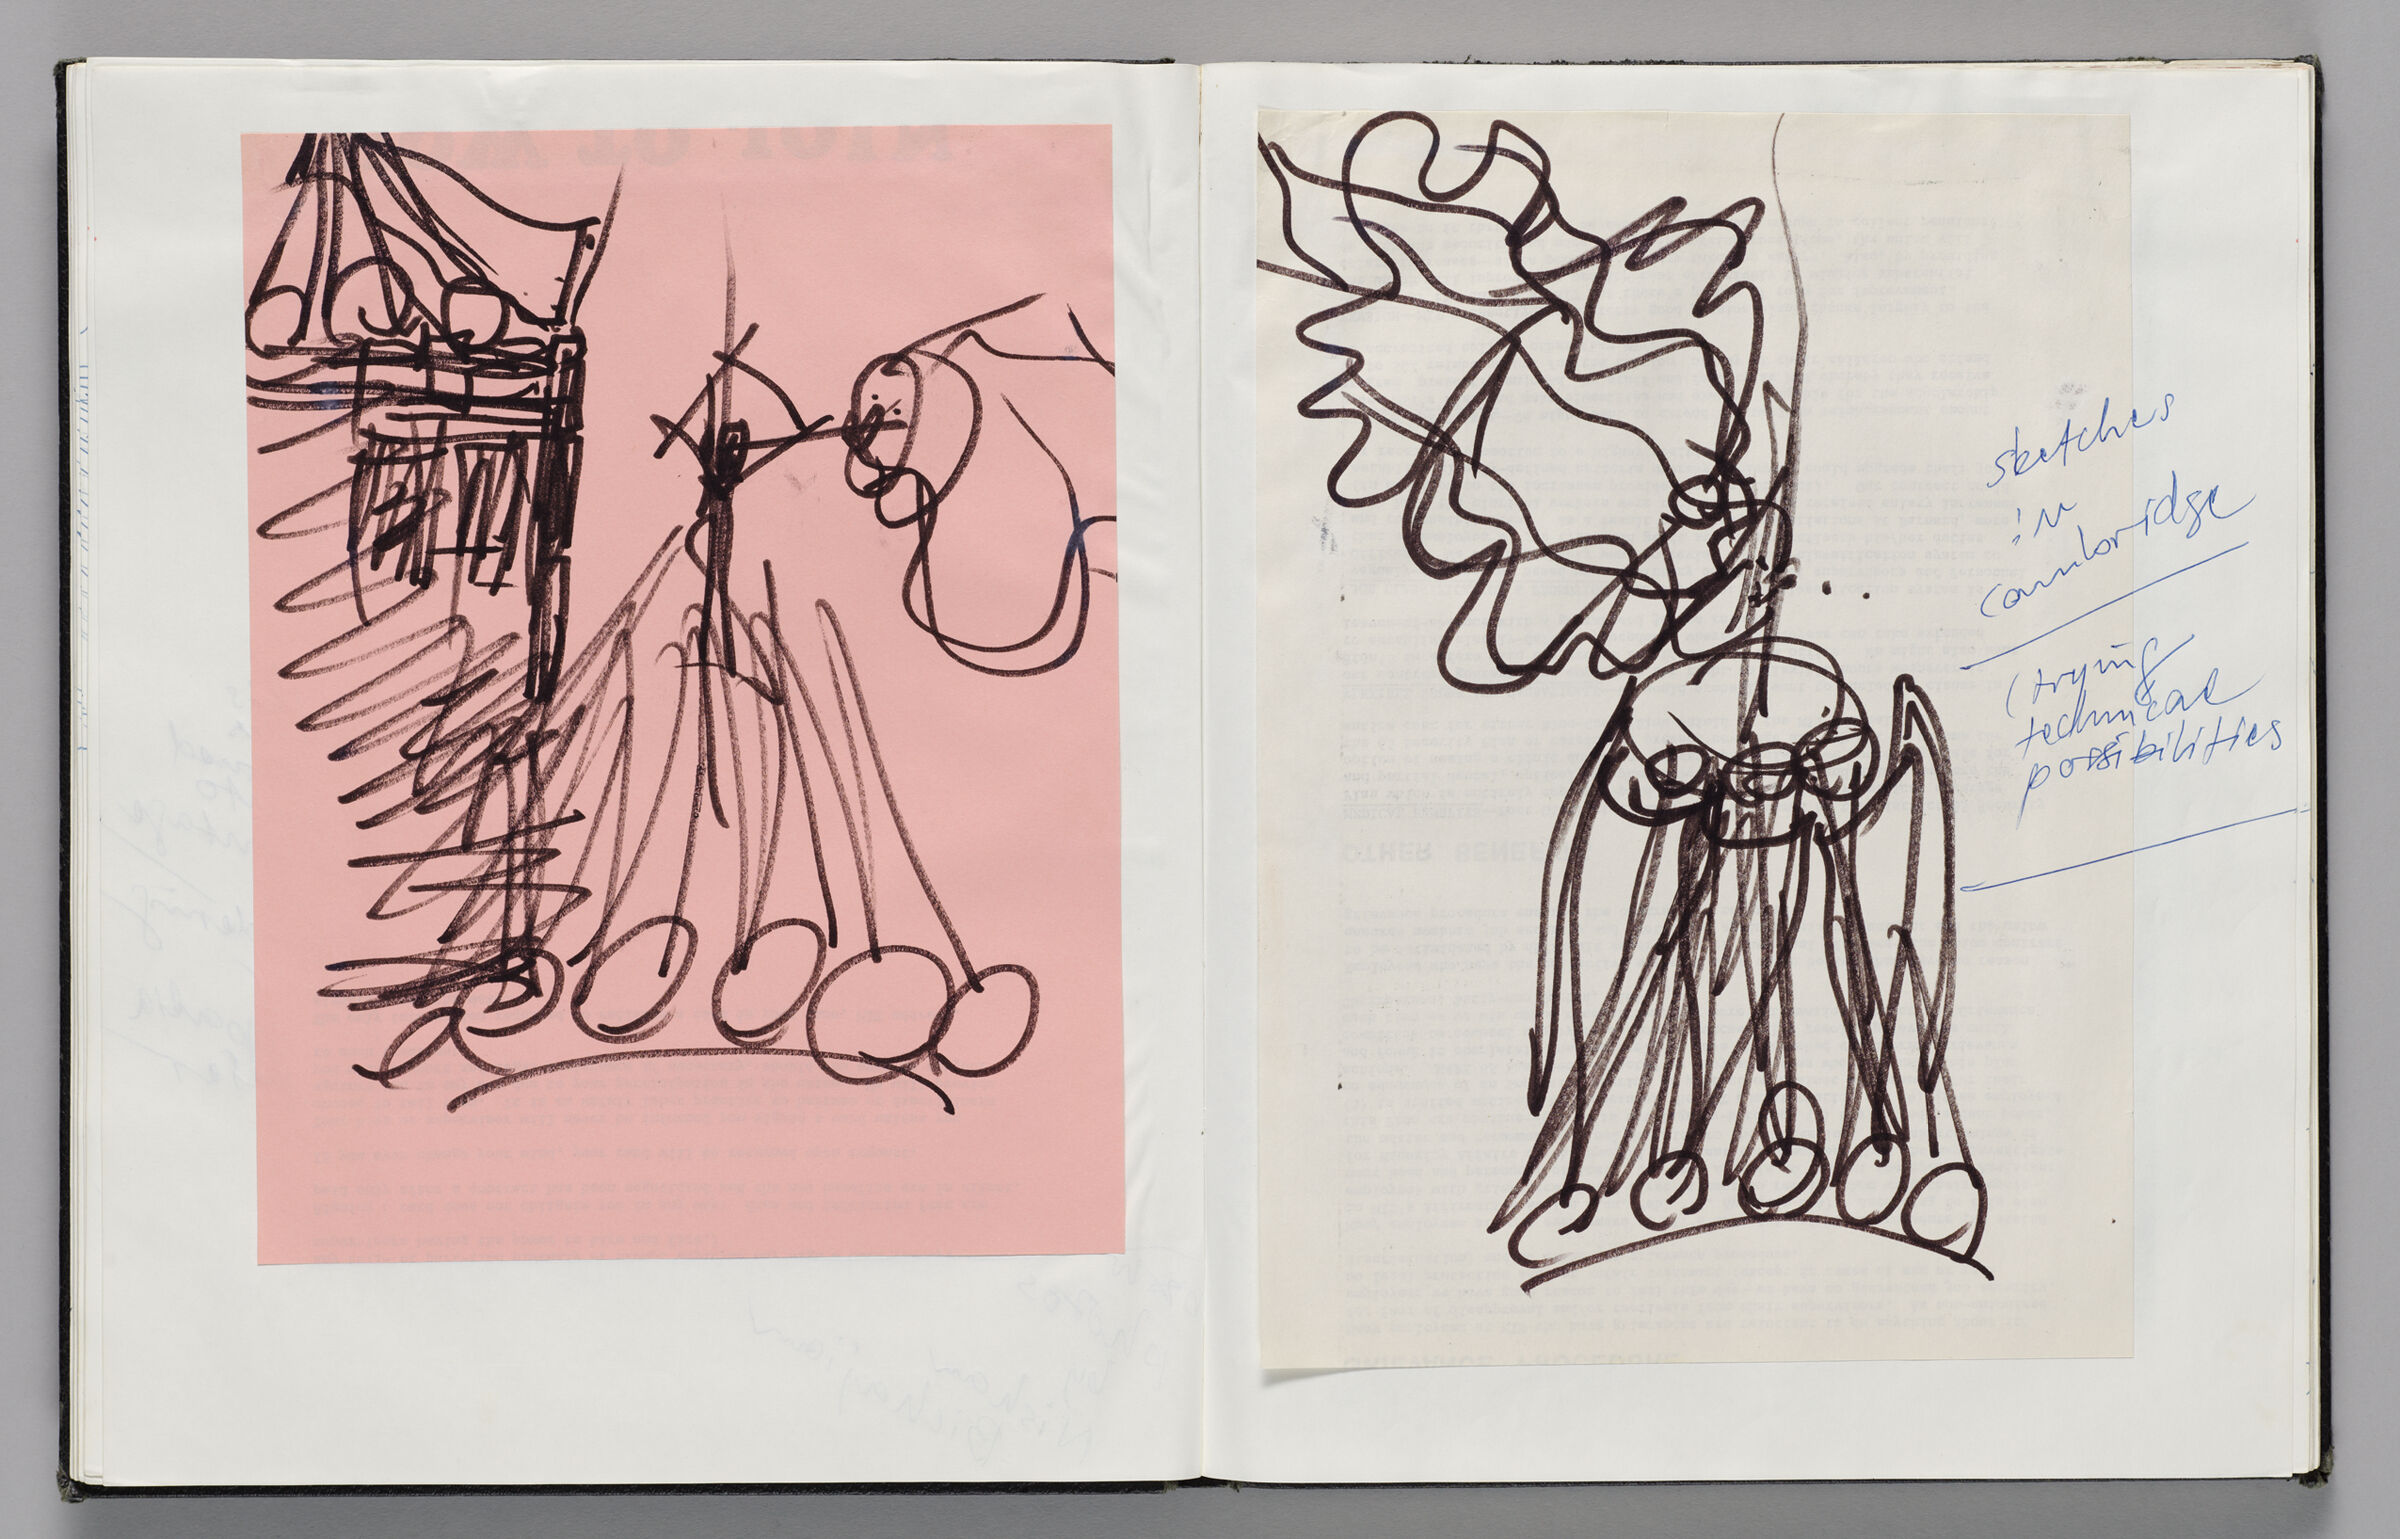 Untitled (Pasted Sketch On Colored Paper, Left Page); Untitled (Pasted Sketch With Notes, Right Page)